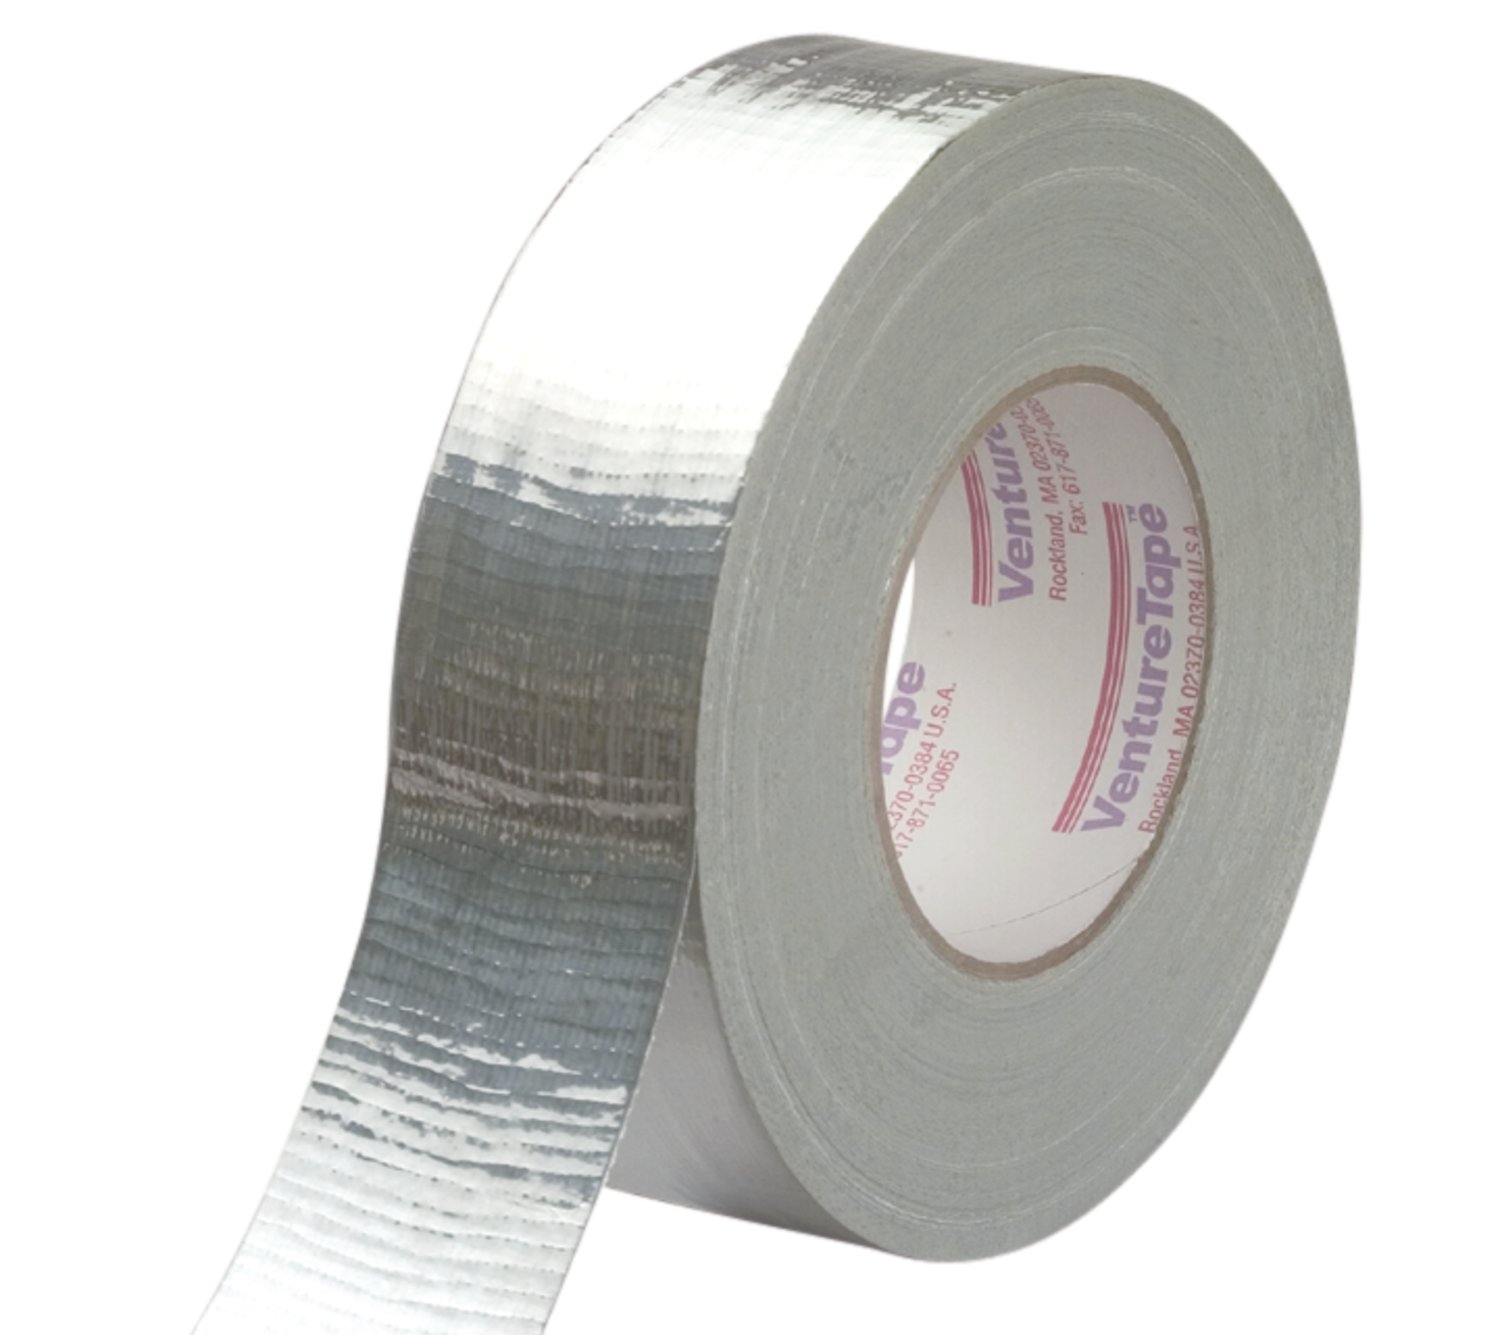 7010337385 - 3M Venture Tape Metallized Cloth Duct Tape 1502, Silver, 48 mm x 55 m
(1.88 in x 60.1 yd), 24/Case